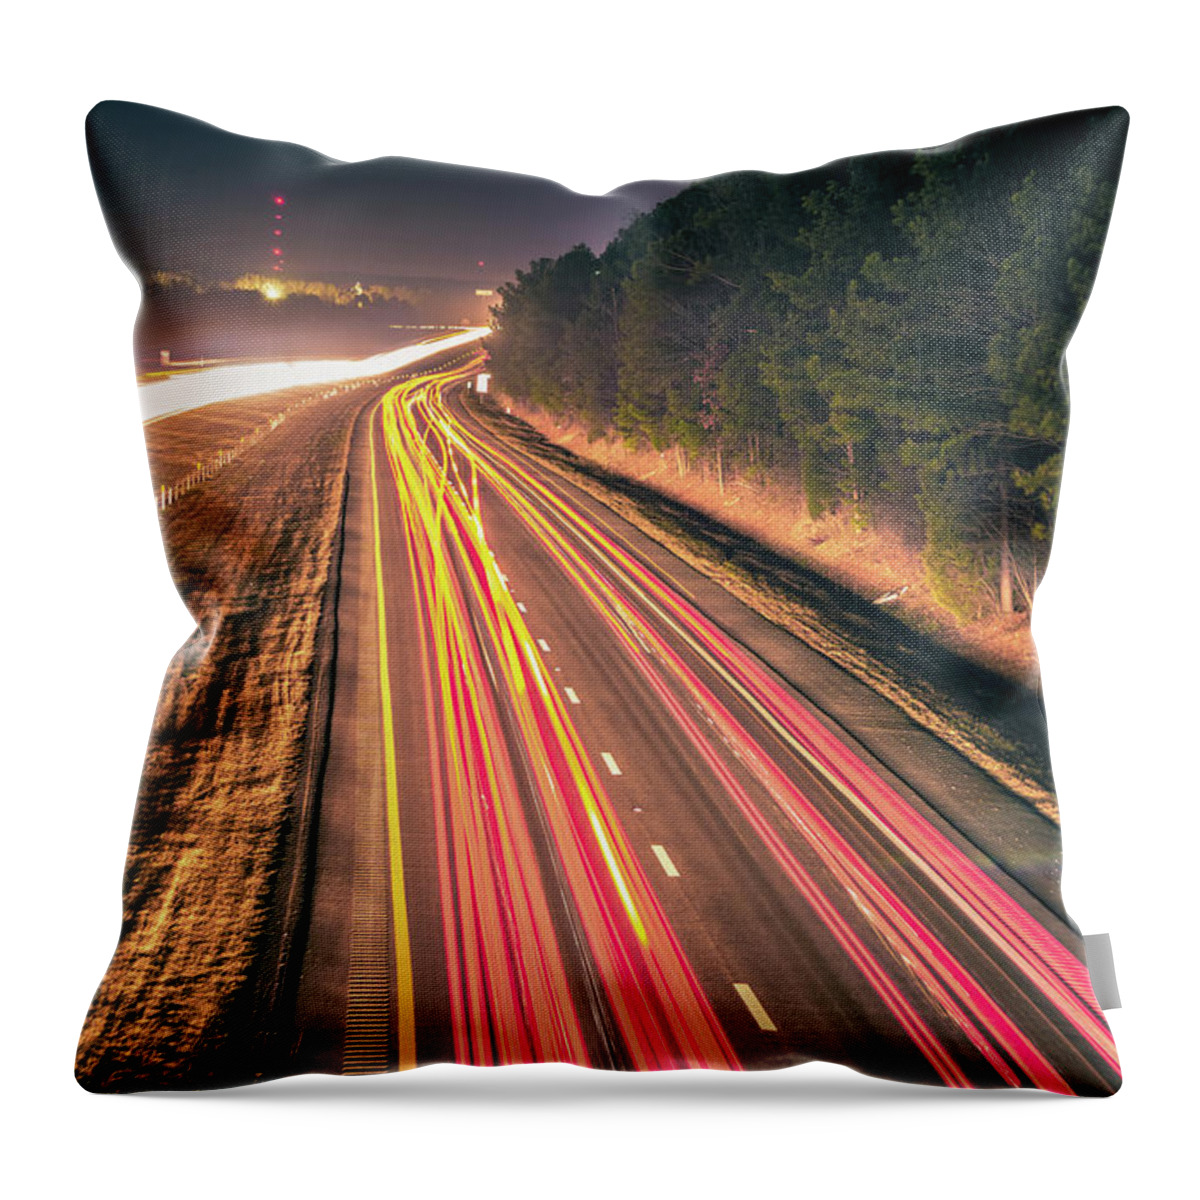 Car Throw Pillow featuring the photograph Super Highway With High Volume Of Cars At Night by Alex Grichenko